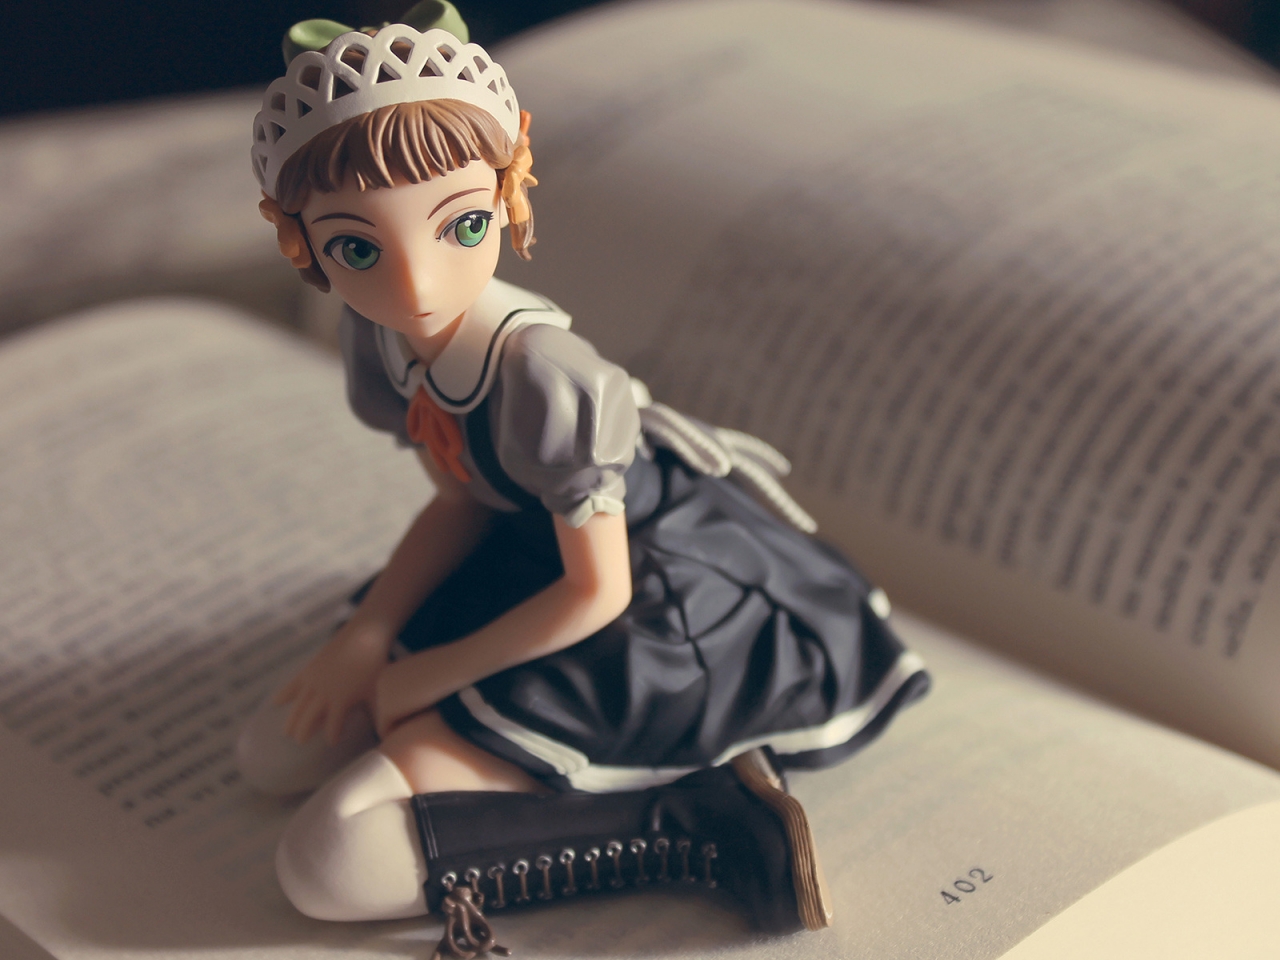 Cute Little Figurine for 1280 x 960 resolution